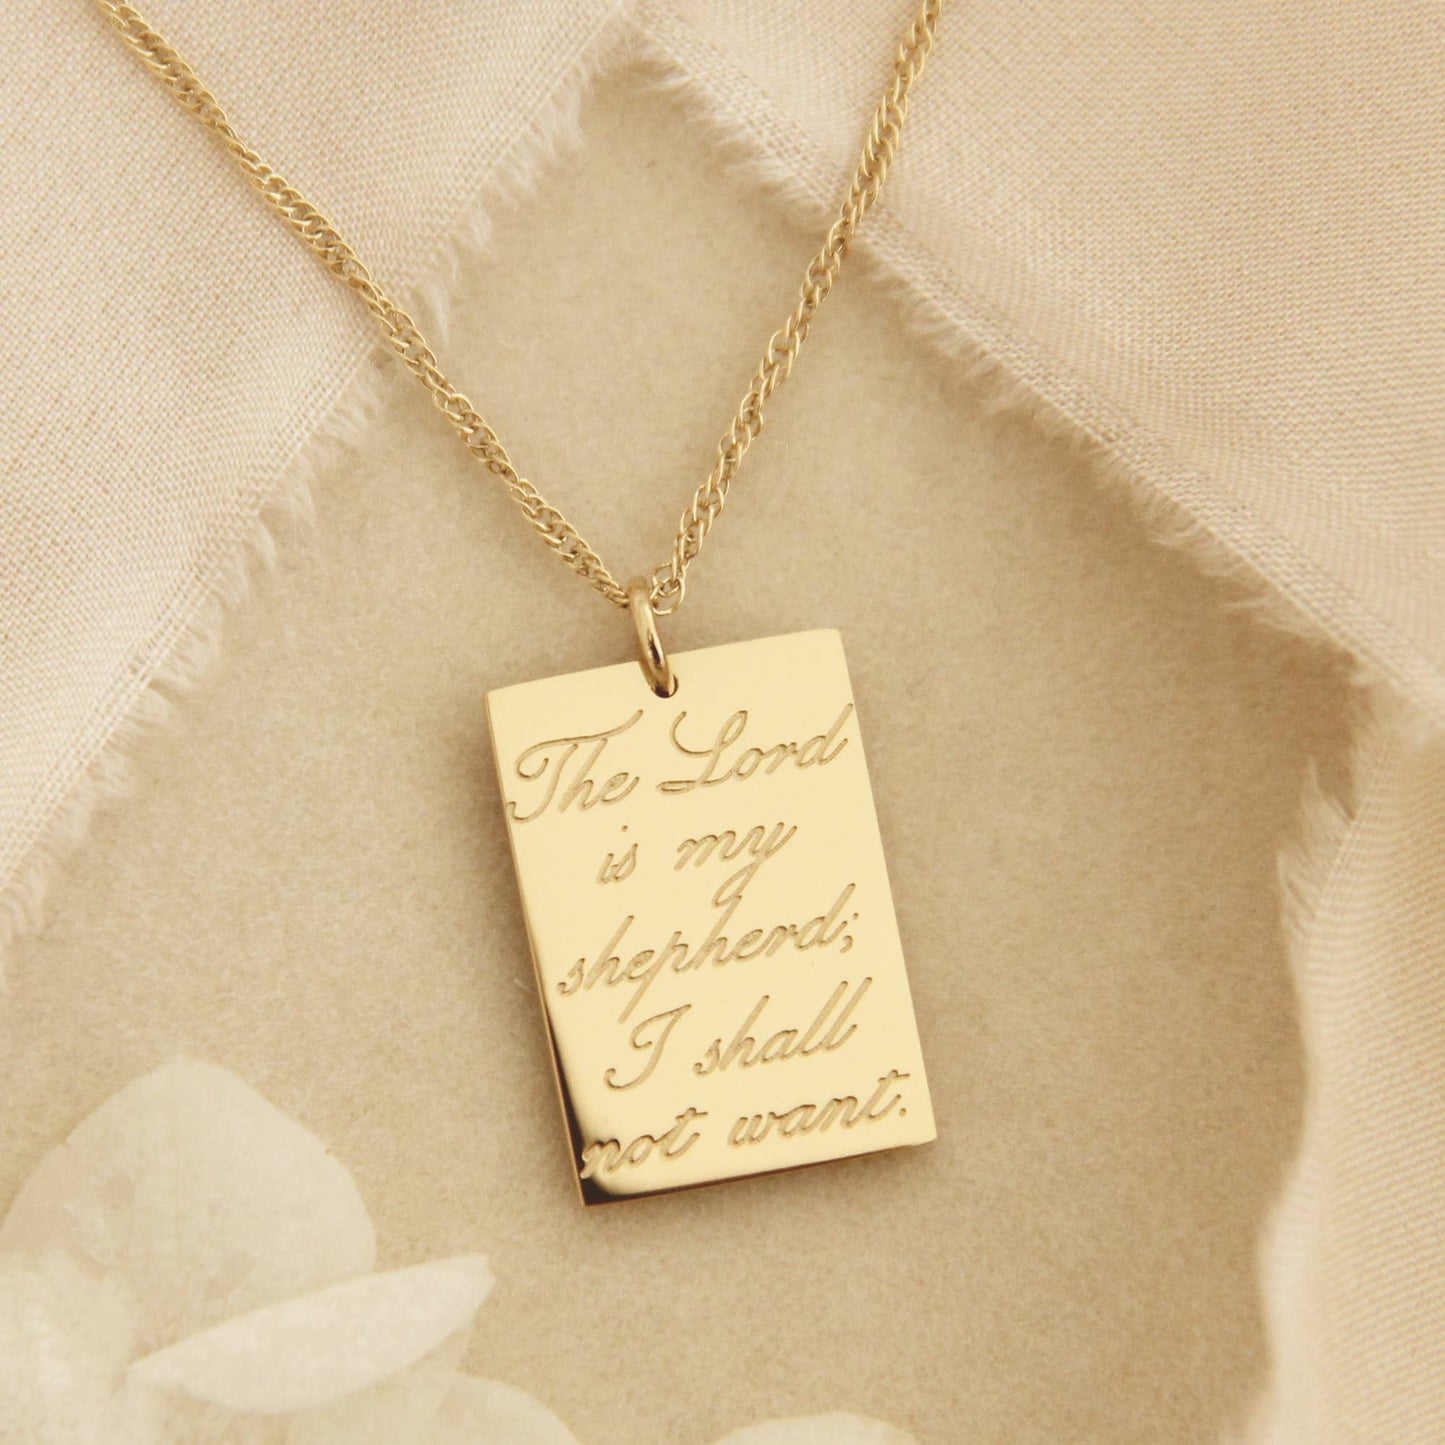 Psalm 23:1 Necklace, The LORD Is My Shepherd